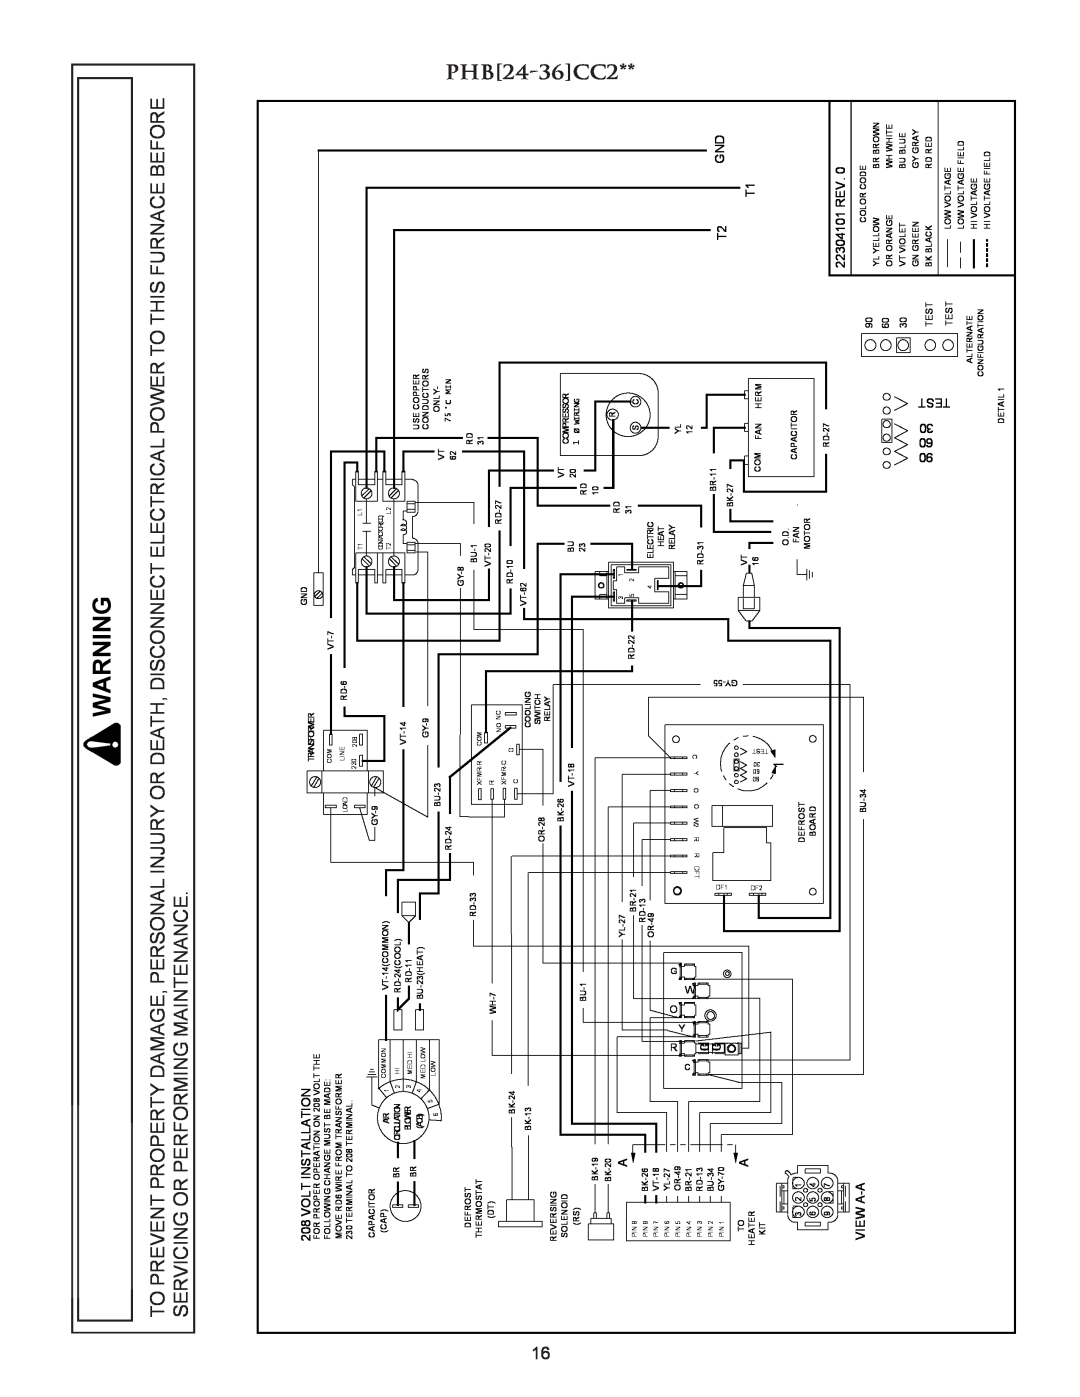 Amana PACKAGE HEAT PUMP installation instructions PHB24-36CC2, Volt Installation, T1 22304101 REV, View A-A, Test 